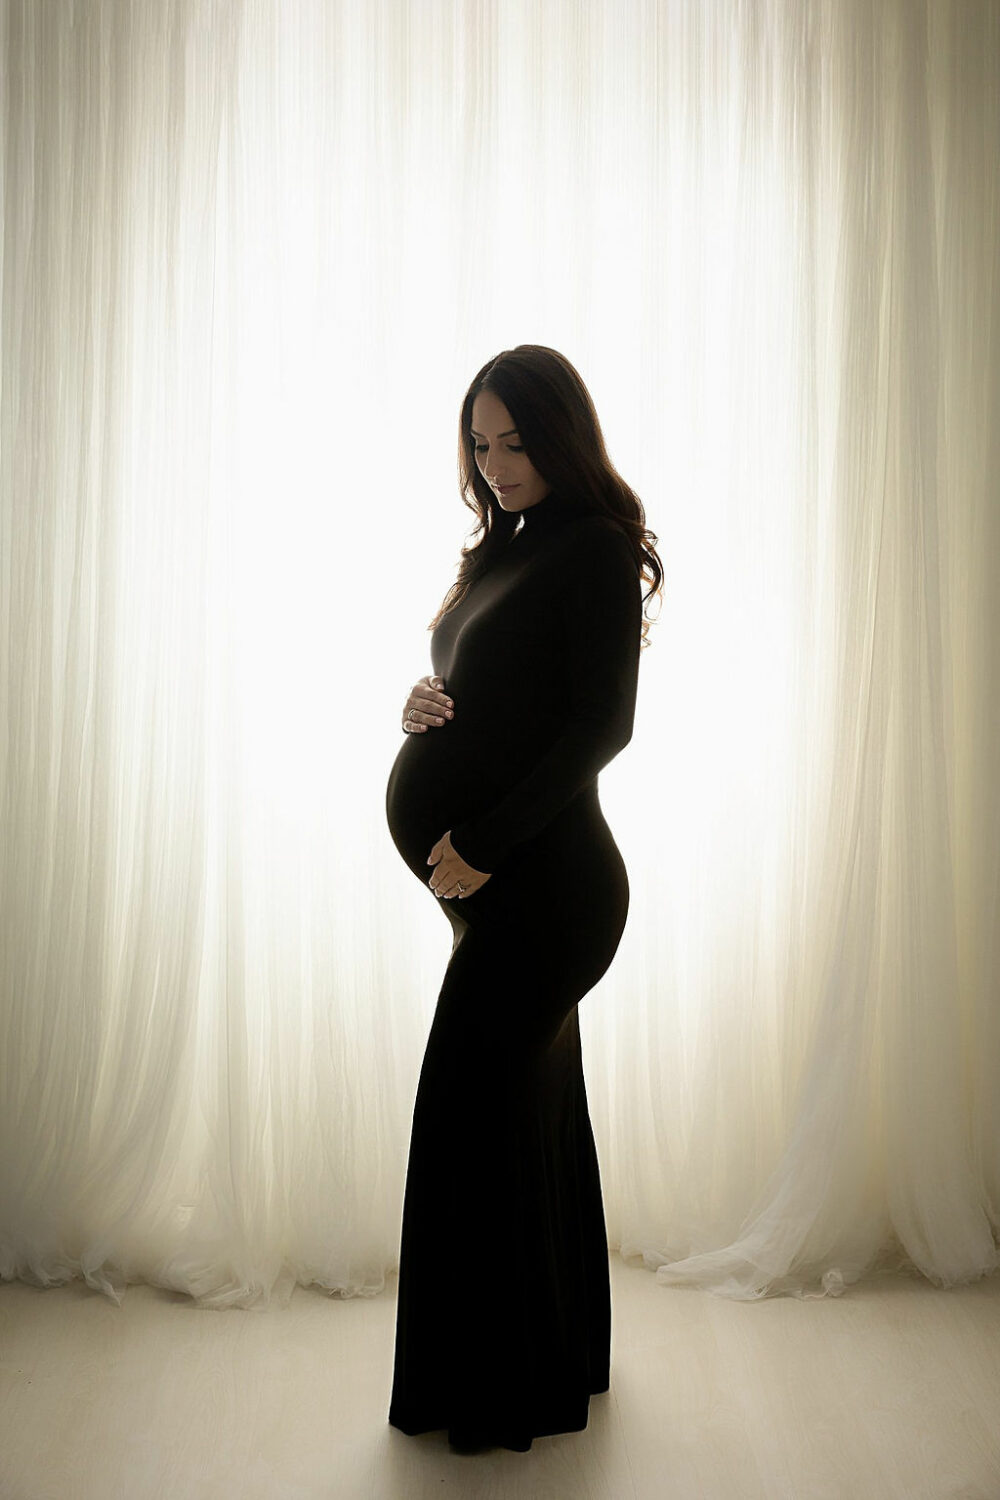 Pregnant woman wearing long dress and posing by holding her belly and looking down against light and bright backdrop for her black-and-white maternity session in Southampton, New Jersey.